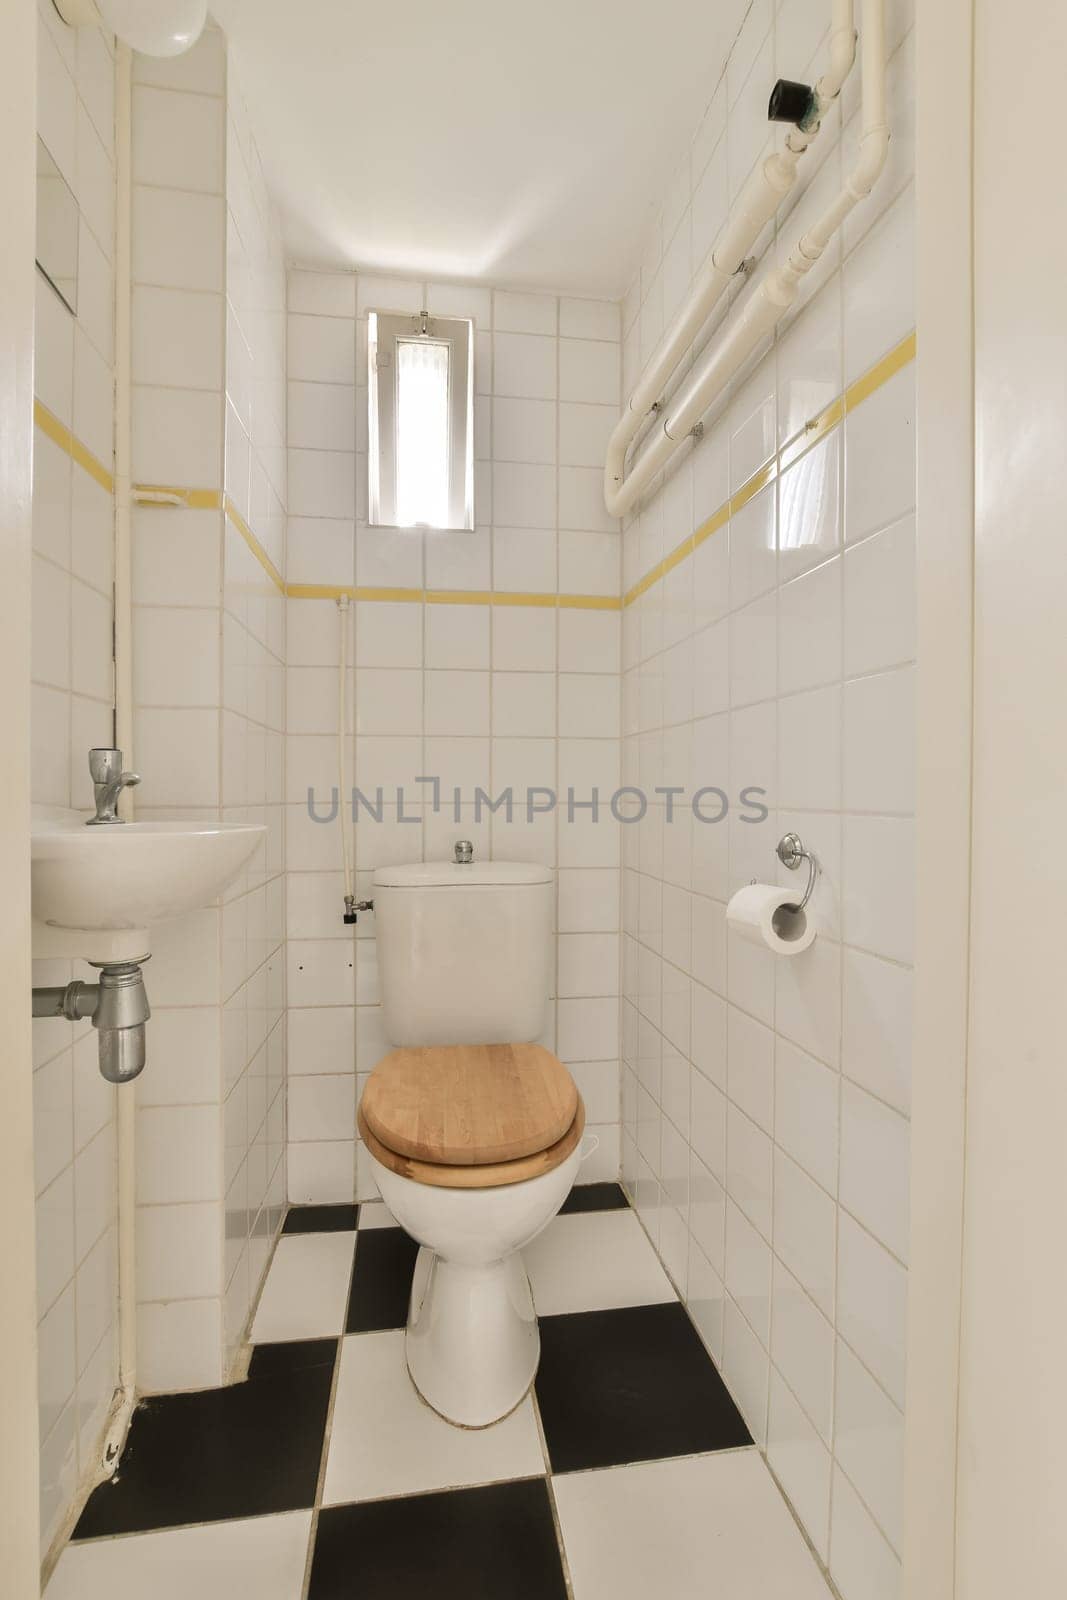 a small bathroom with black and white tiles on the floor, including a wooden seat in the toilet is next to the sink